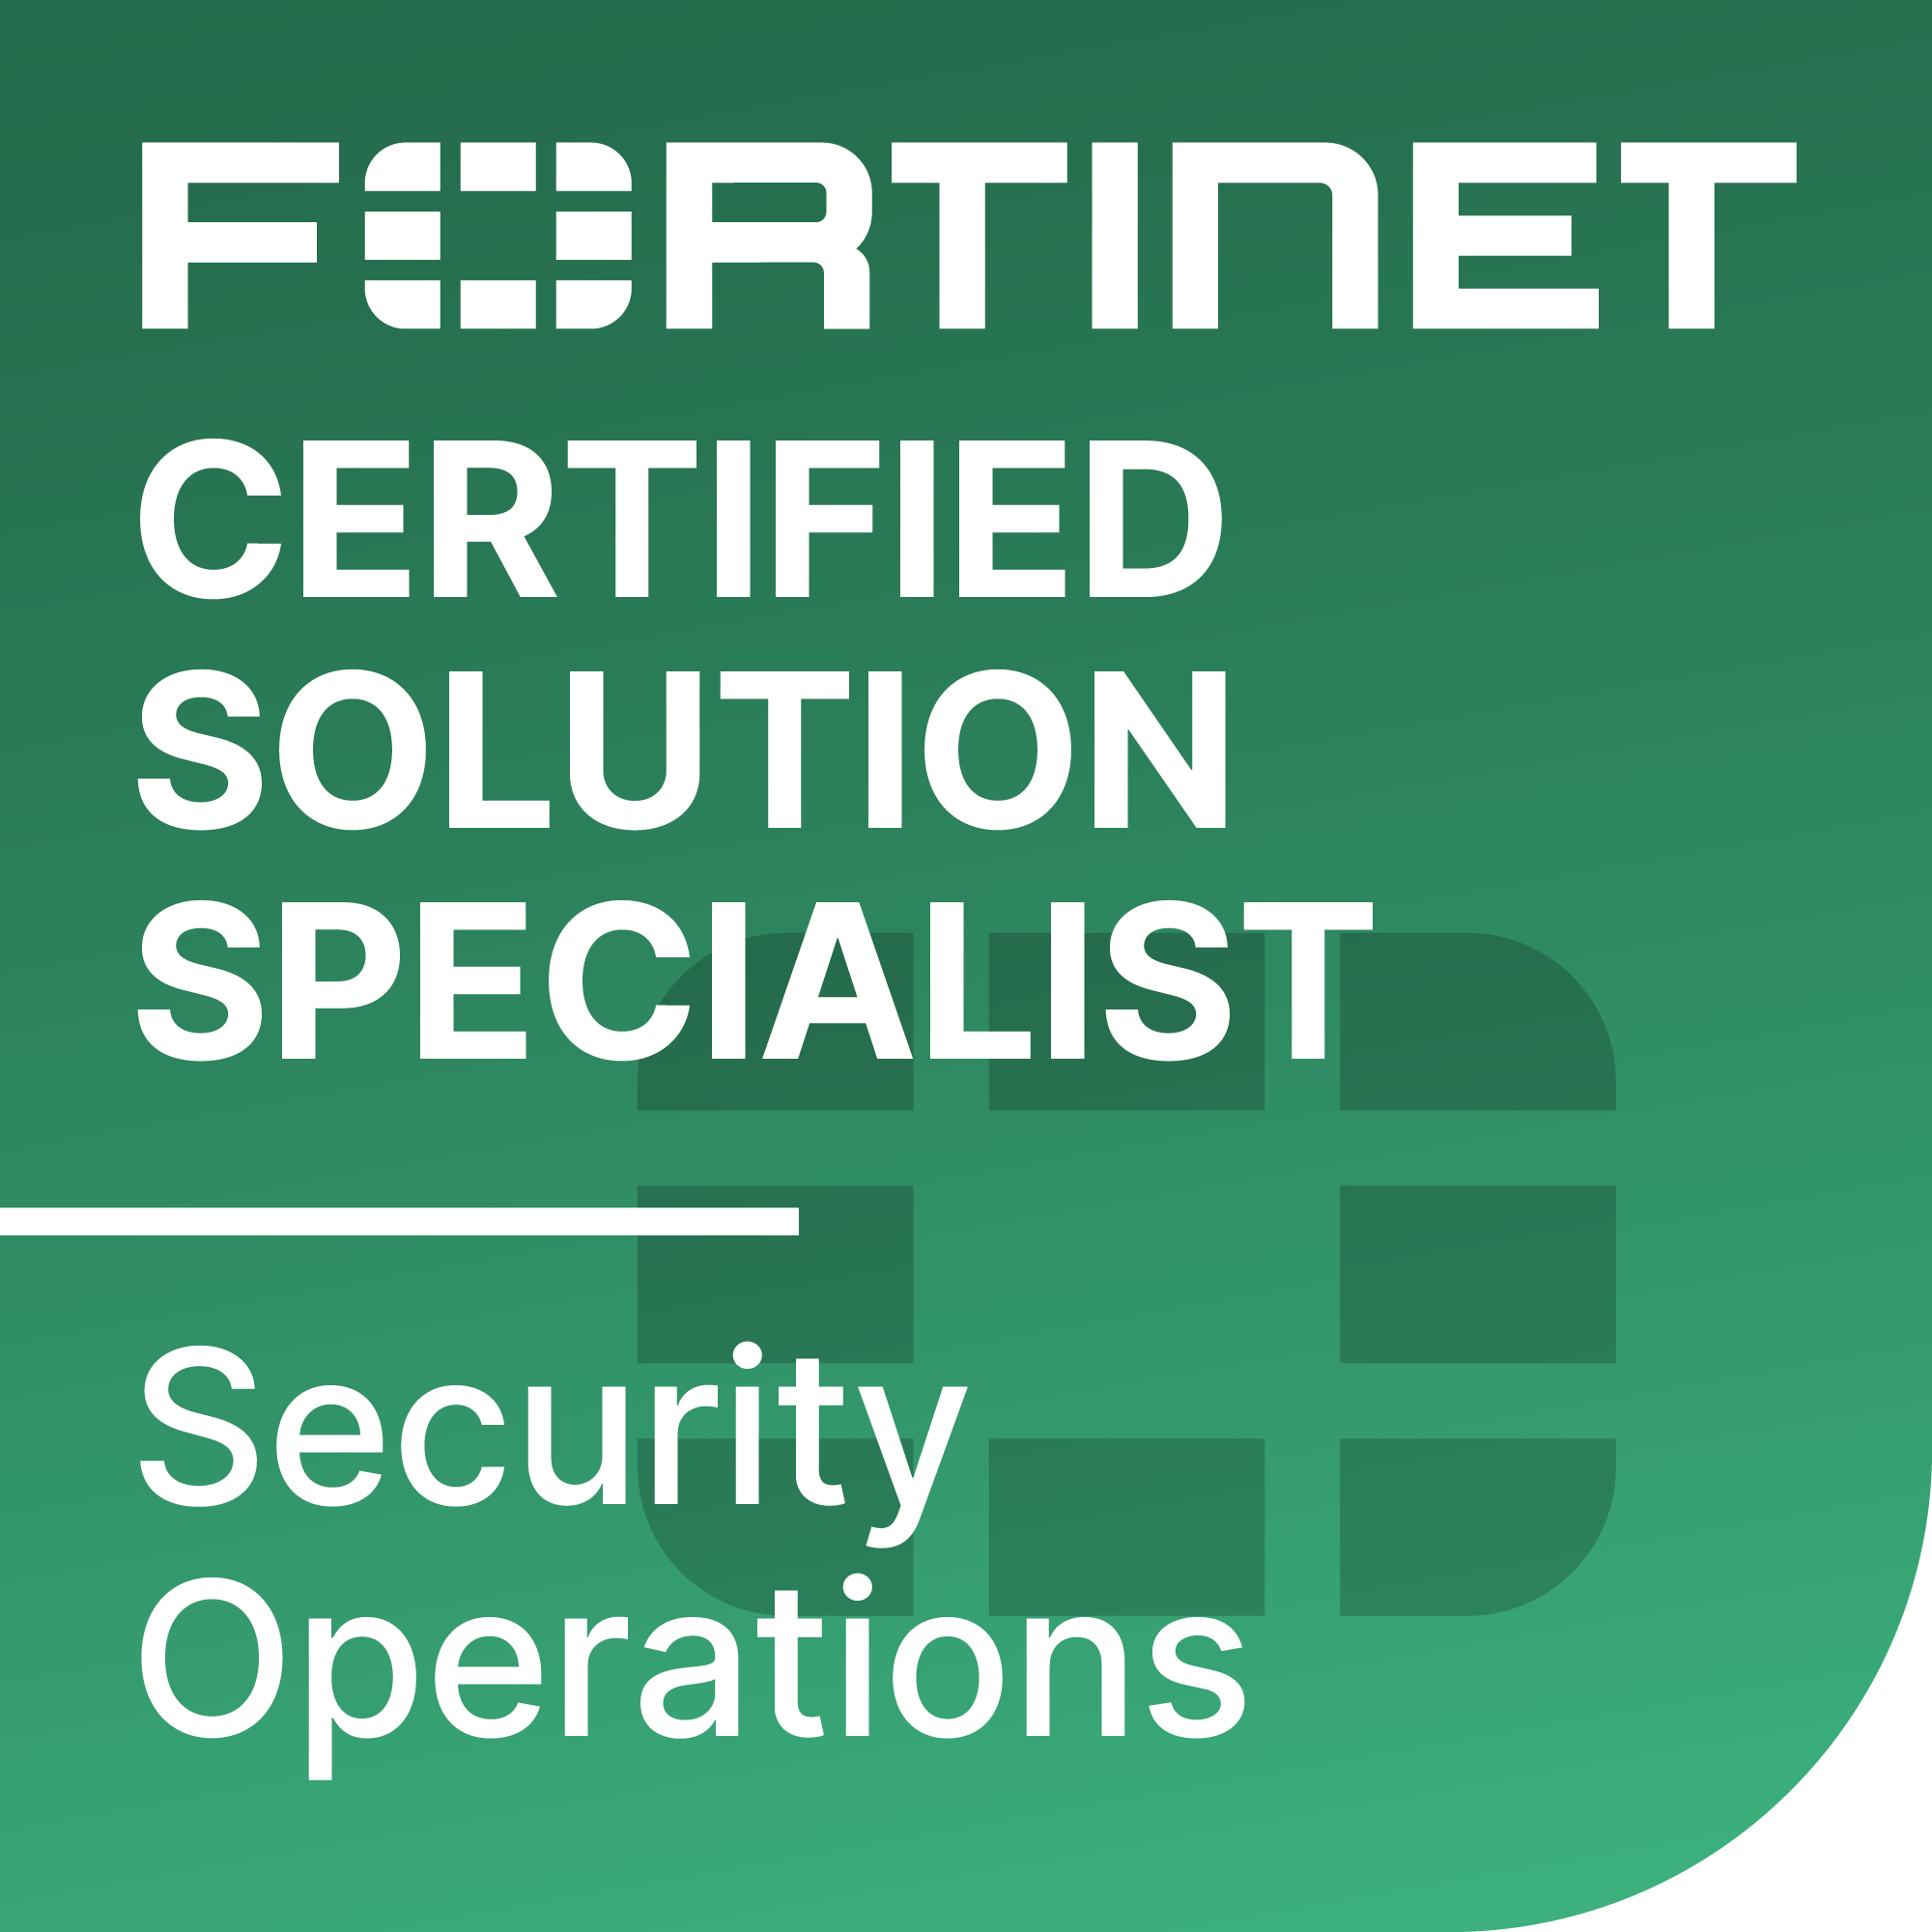 Fortinet Certified Solution Specialist Security Operations badge